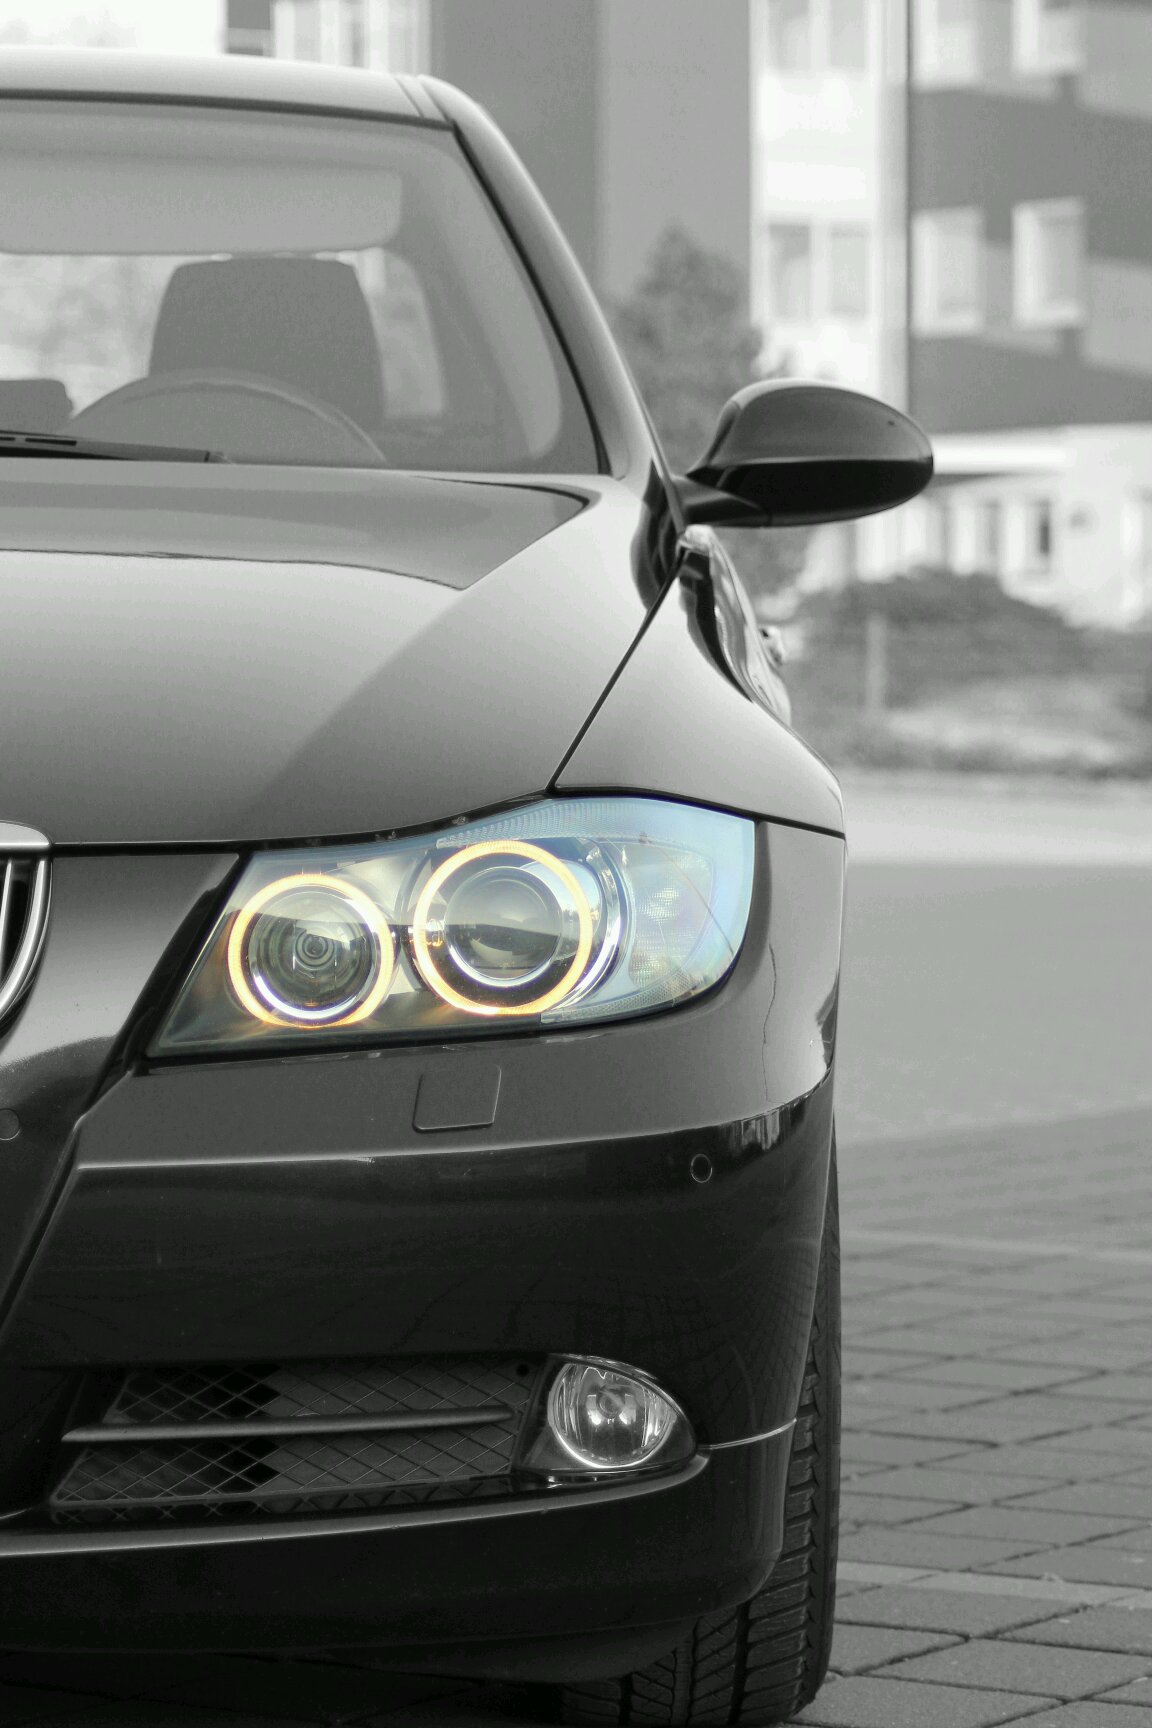 Bmw E90 Wallpapers